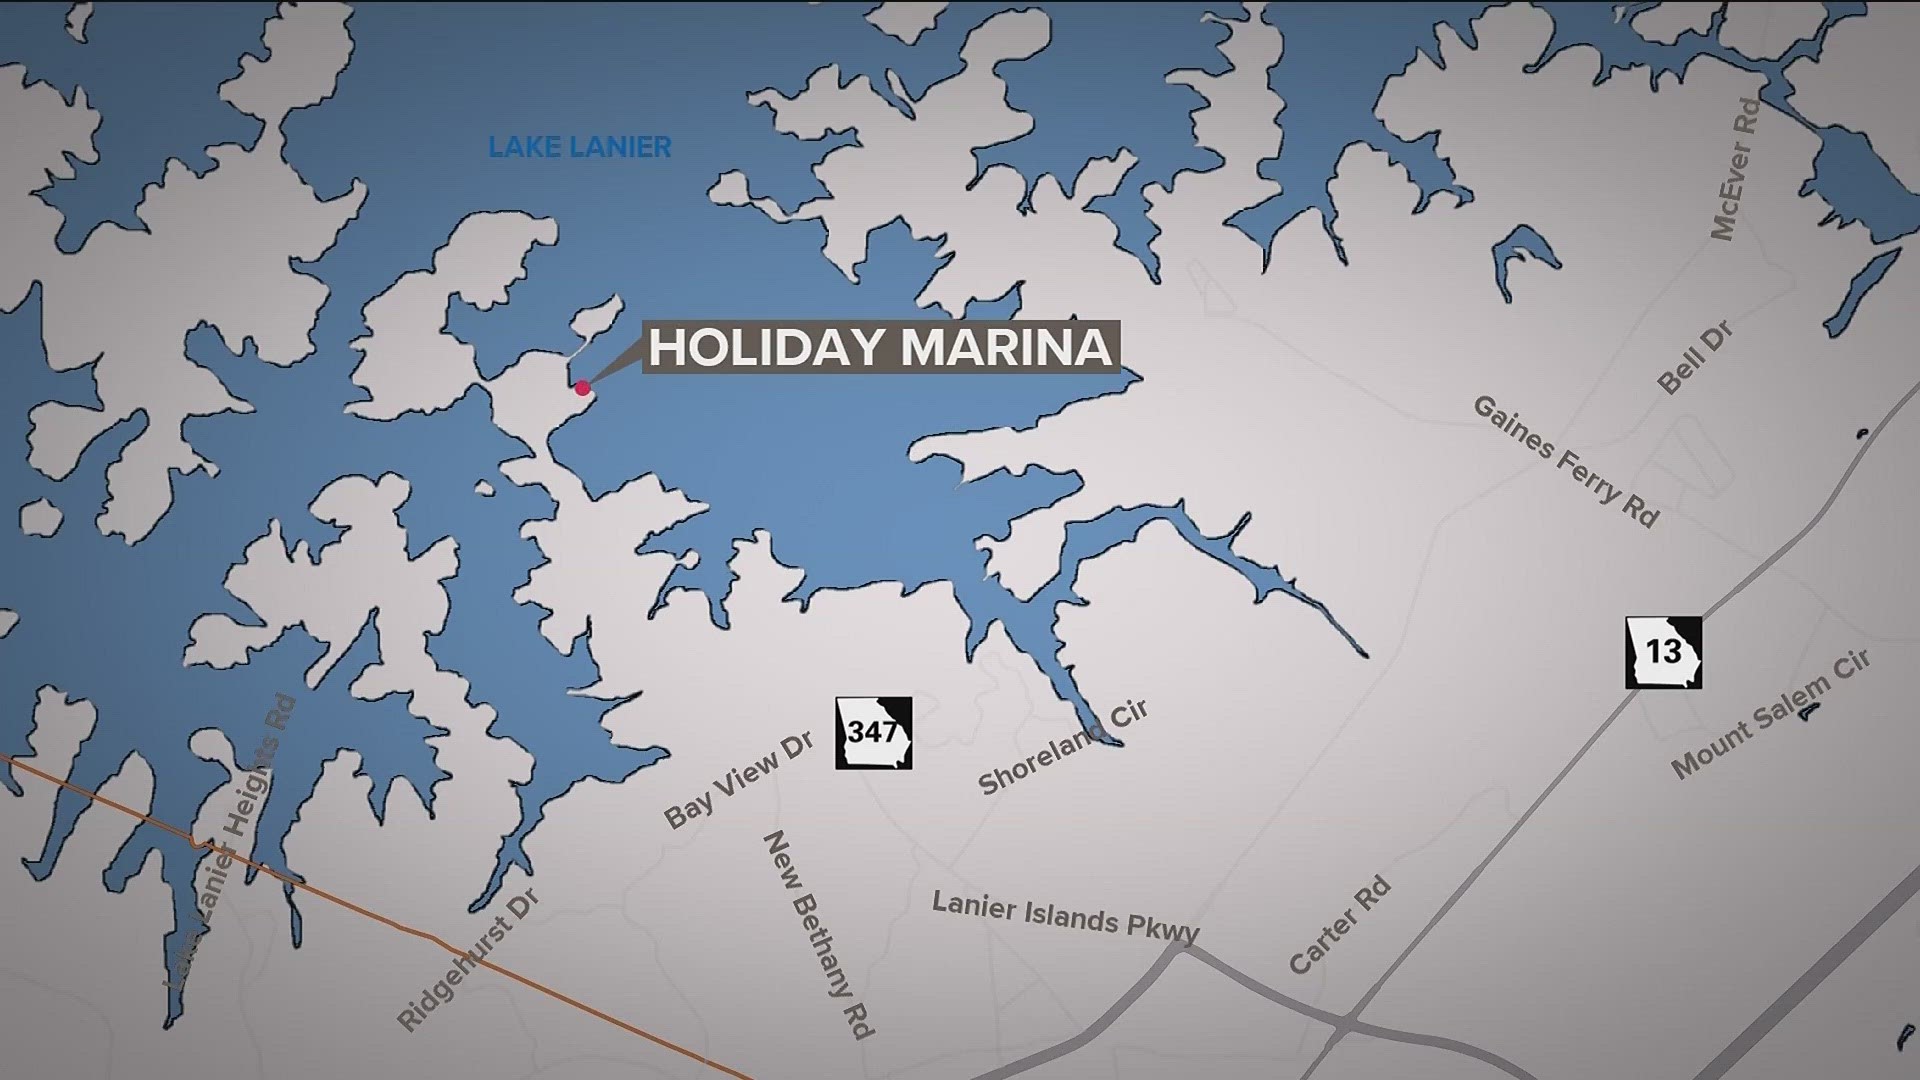 23-year-old drowns after slipping from dock on Lake Lanier | 11alive.com